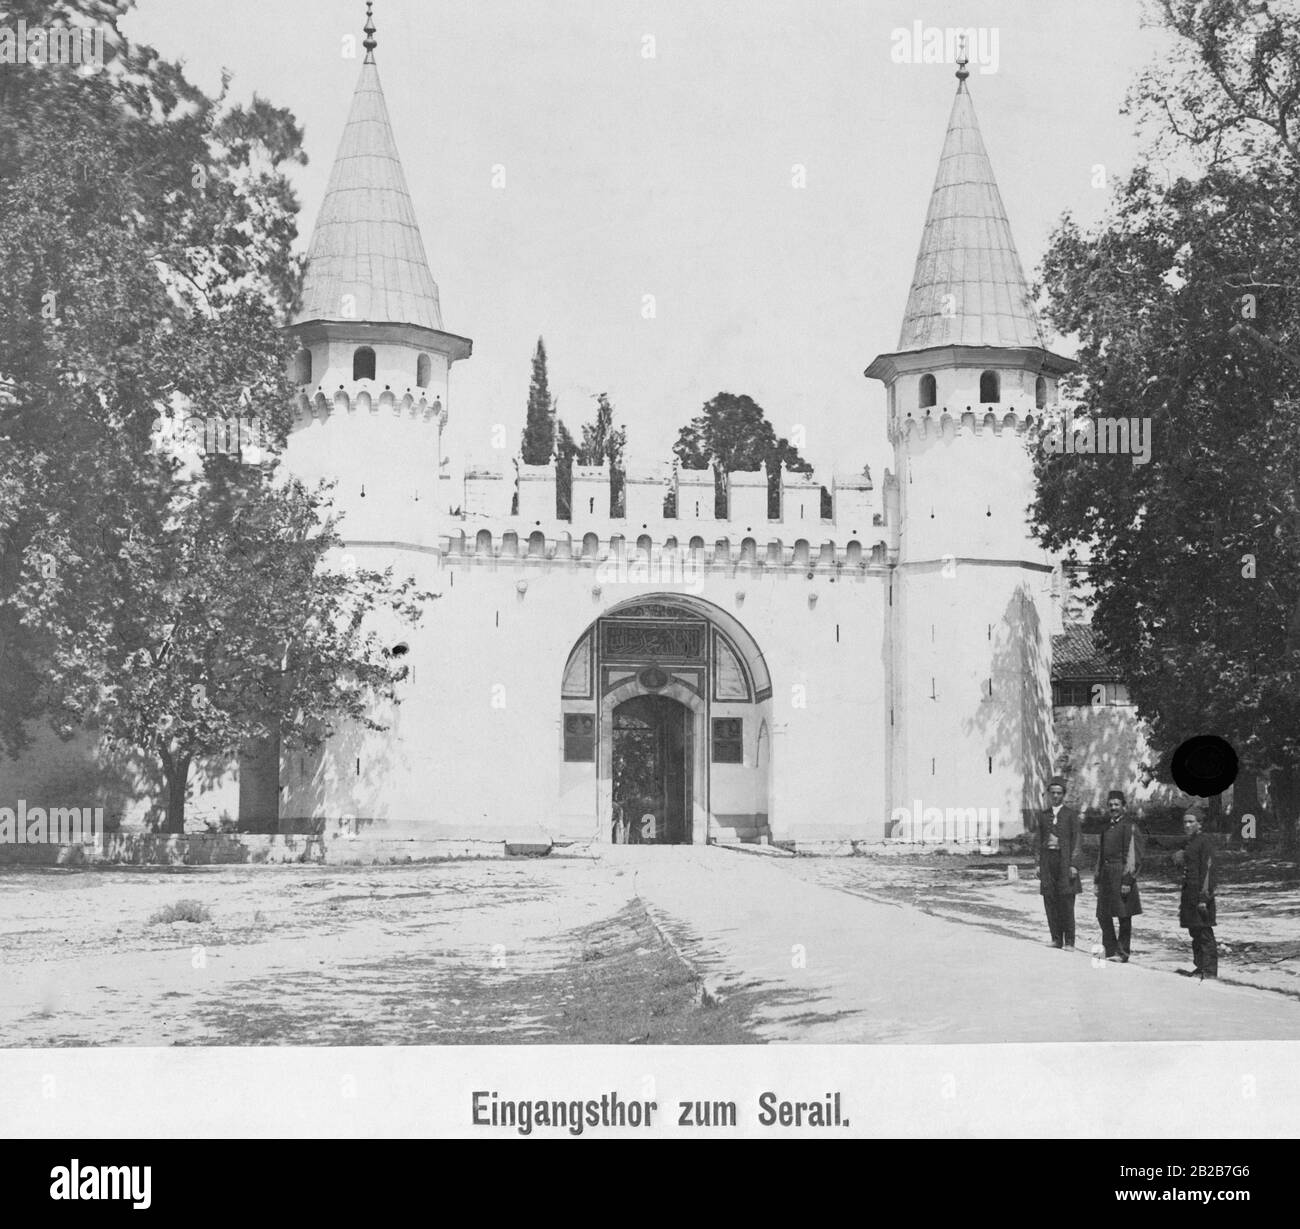 The entrance gate to Topkapi Palace in Istanbul, which served for centuries as the residence and seat of government of the Ottoman sultans and the administrative center of the Ottoman Empire. The photo is undated. Stock Photo